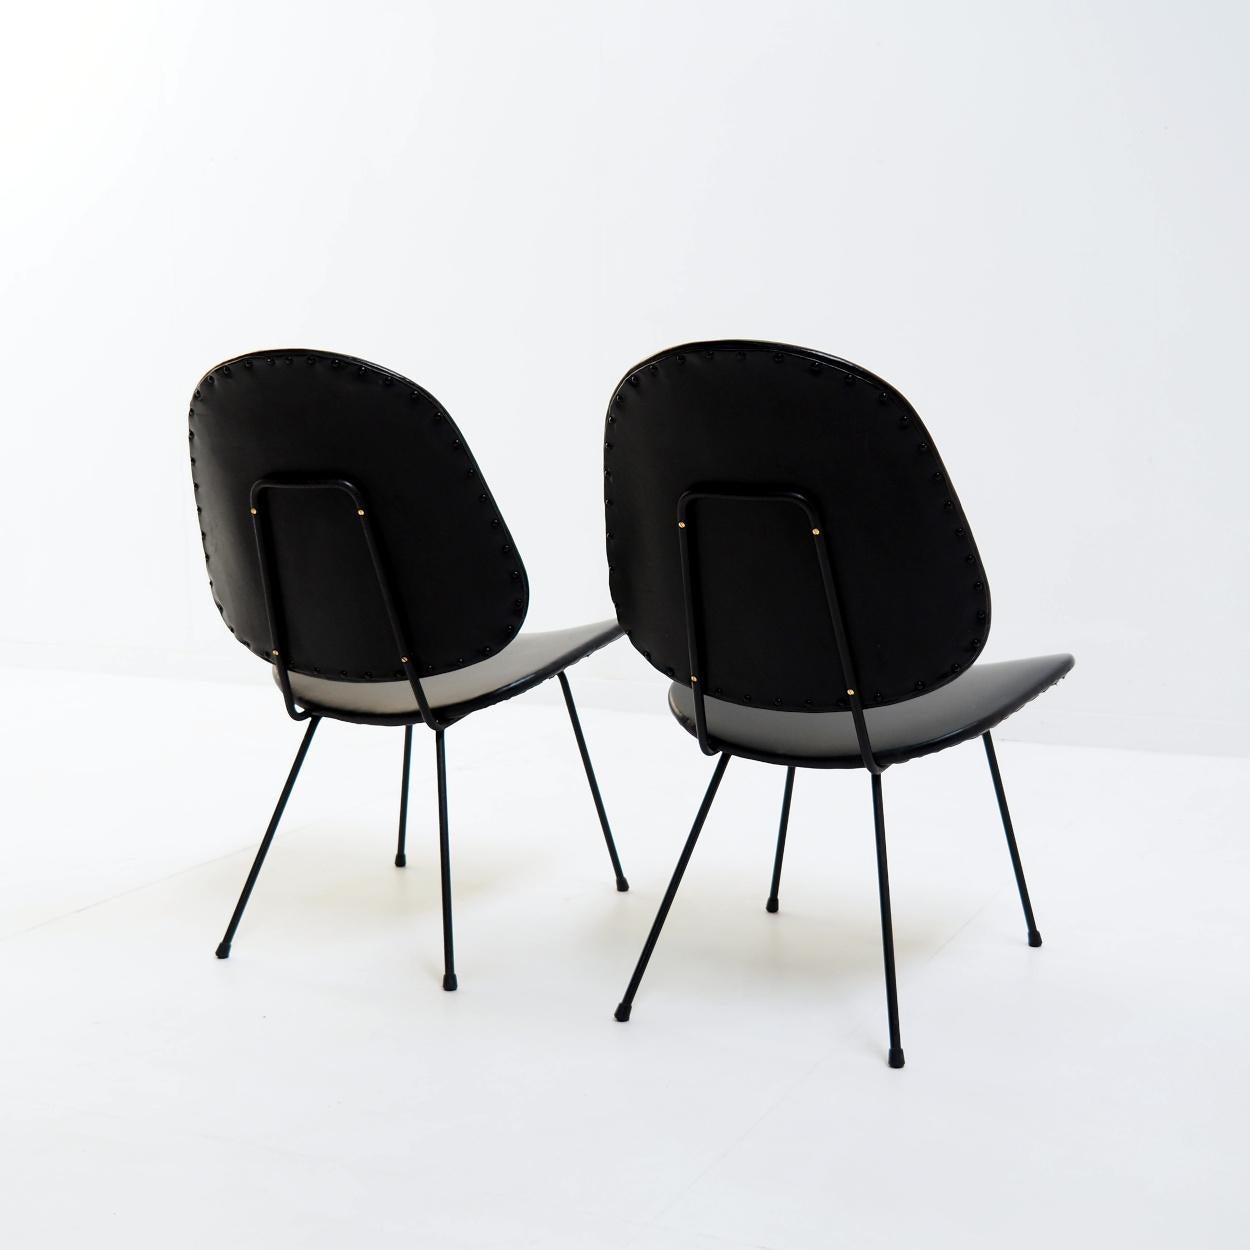 Mid-20th Century Two Chairs Designed by W.H.Gispen for the Dutch Company Kembo For Sale